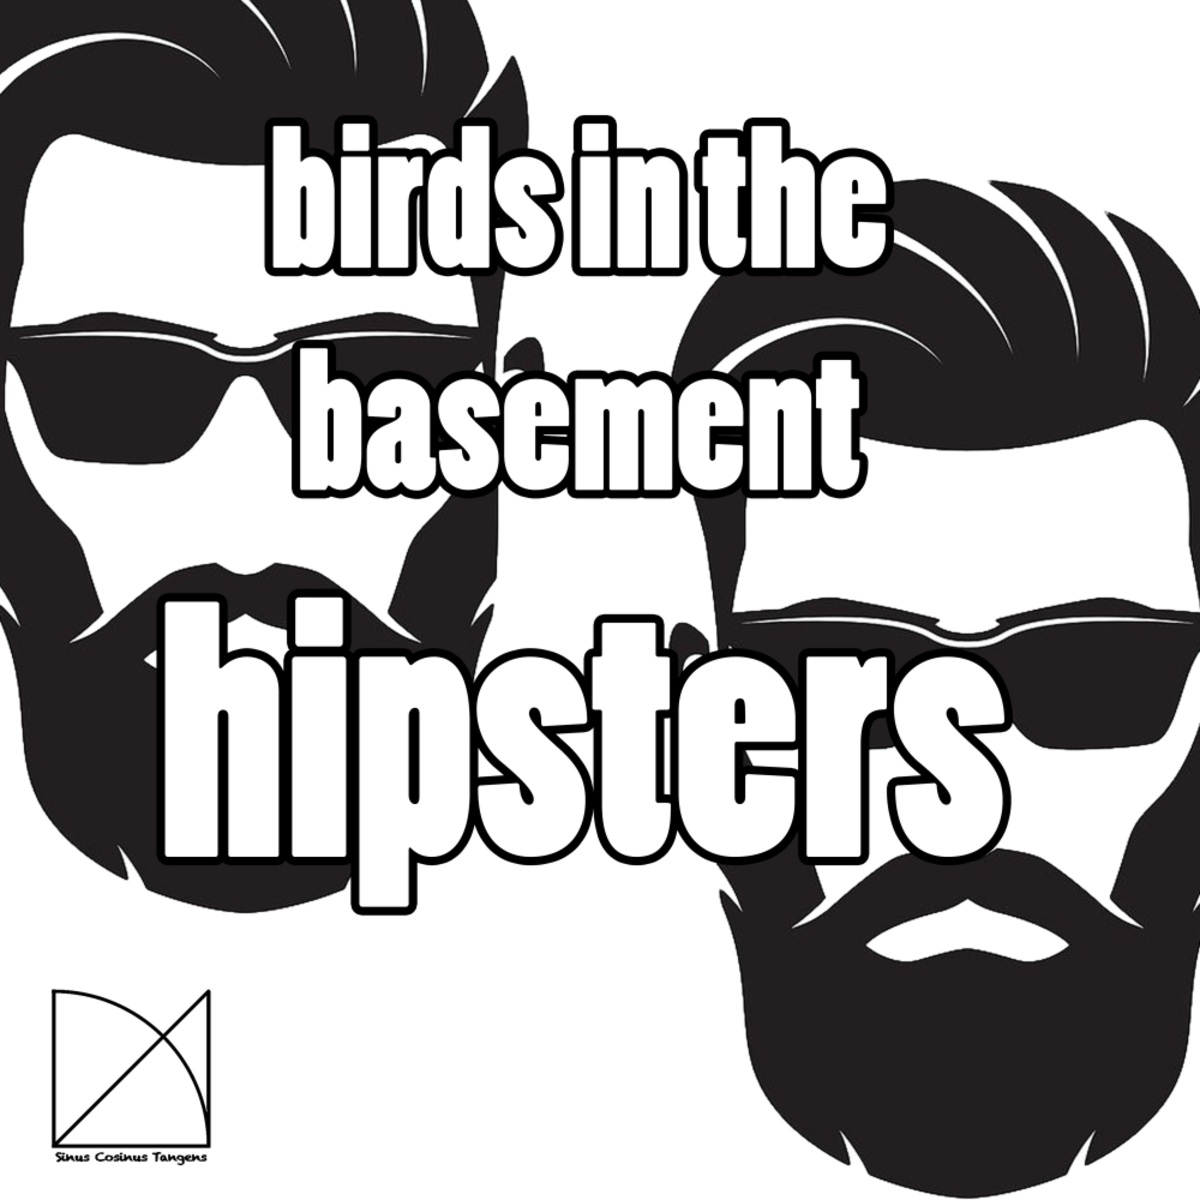 Birds in the Basement - Hipsters / Sinus Cosinus Tangens Records